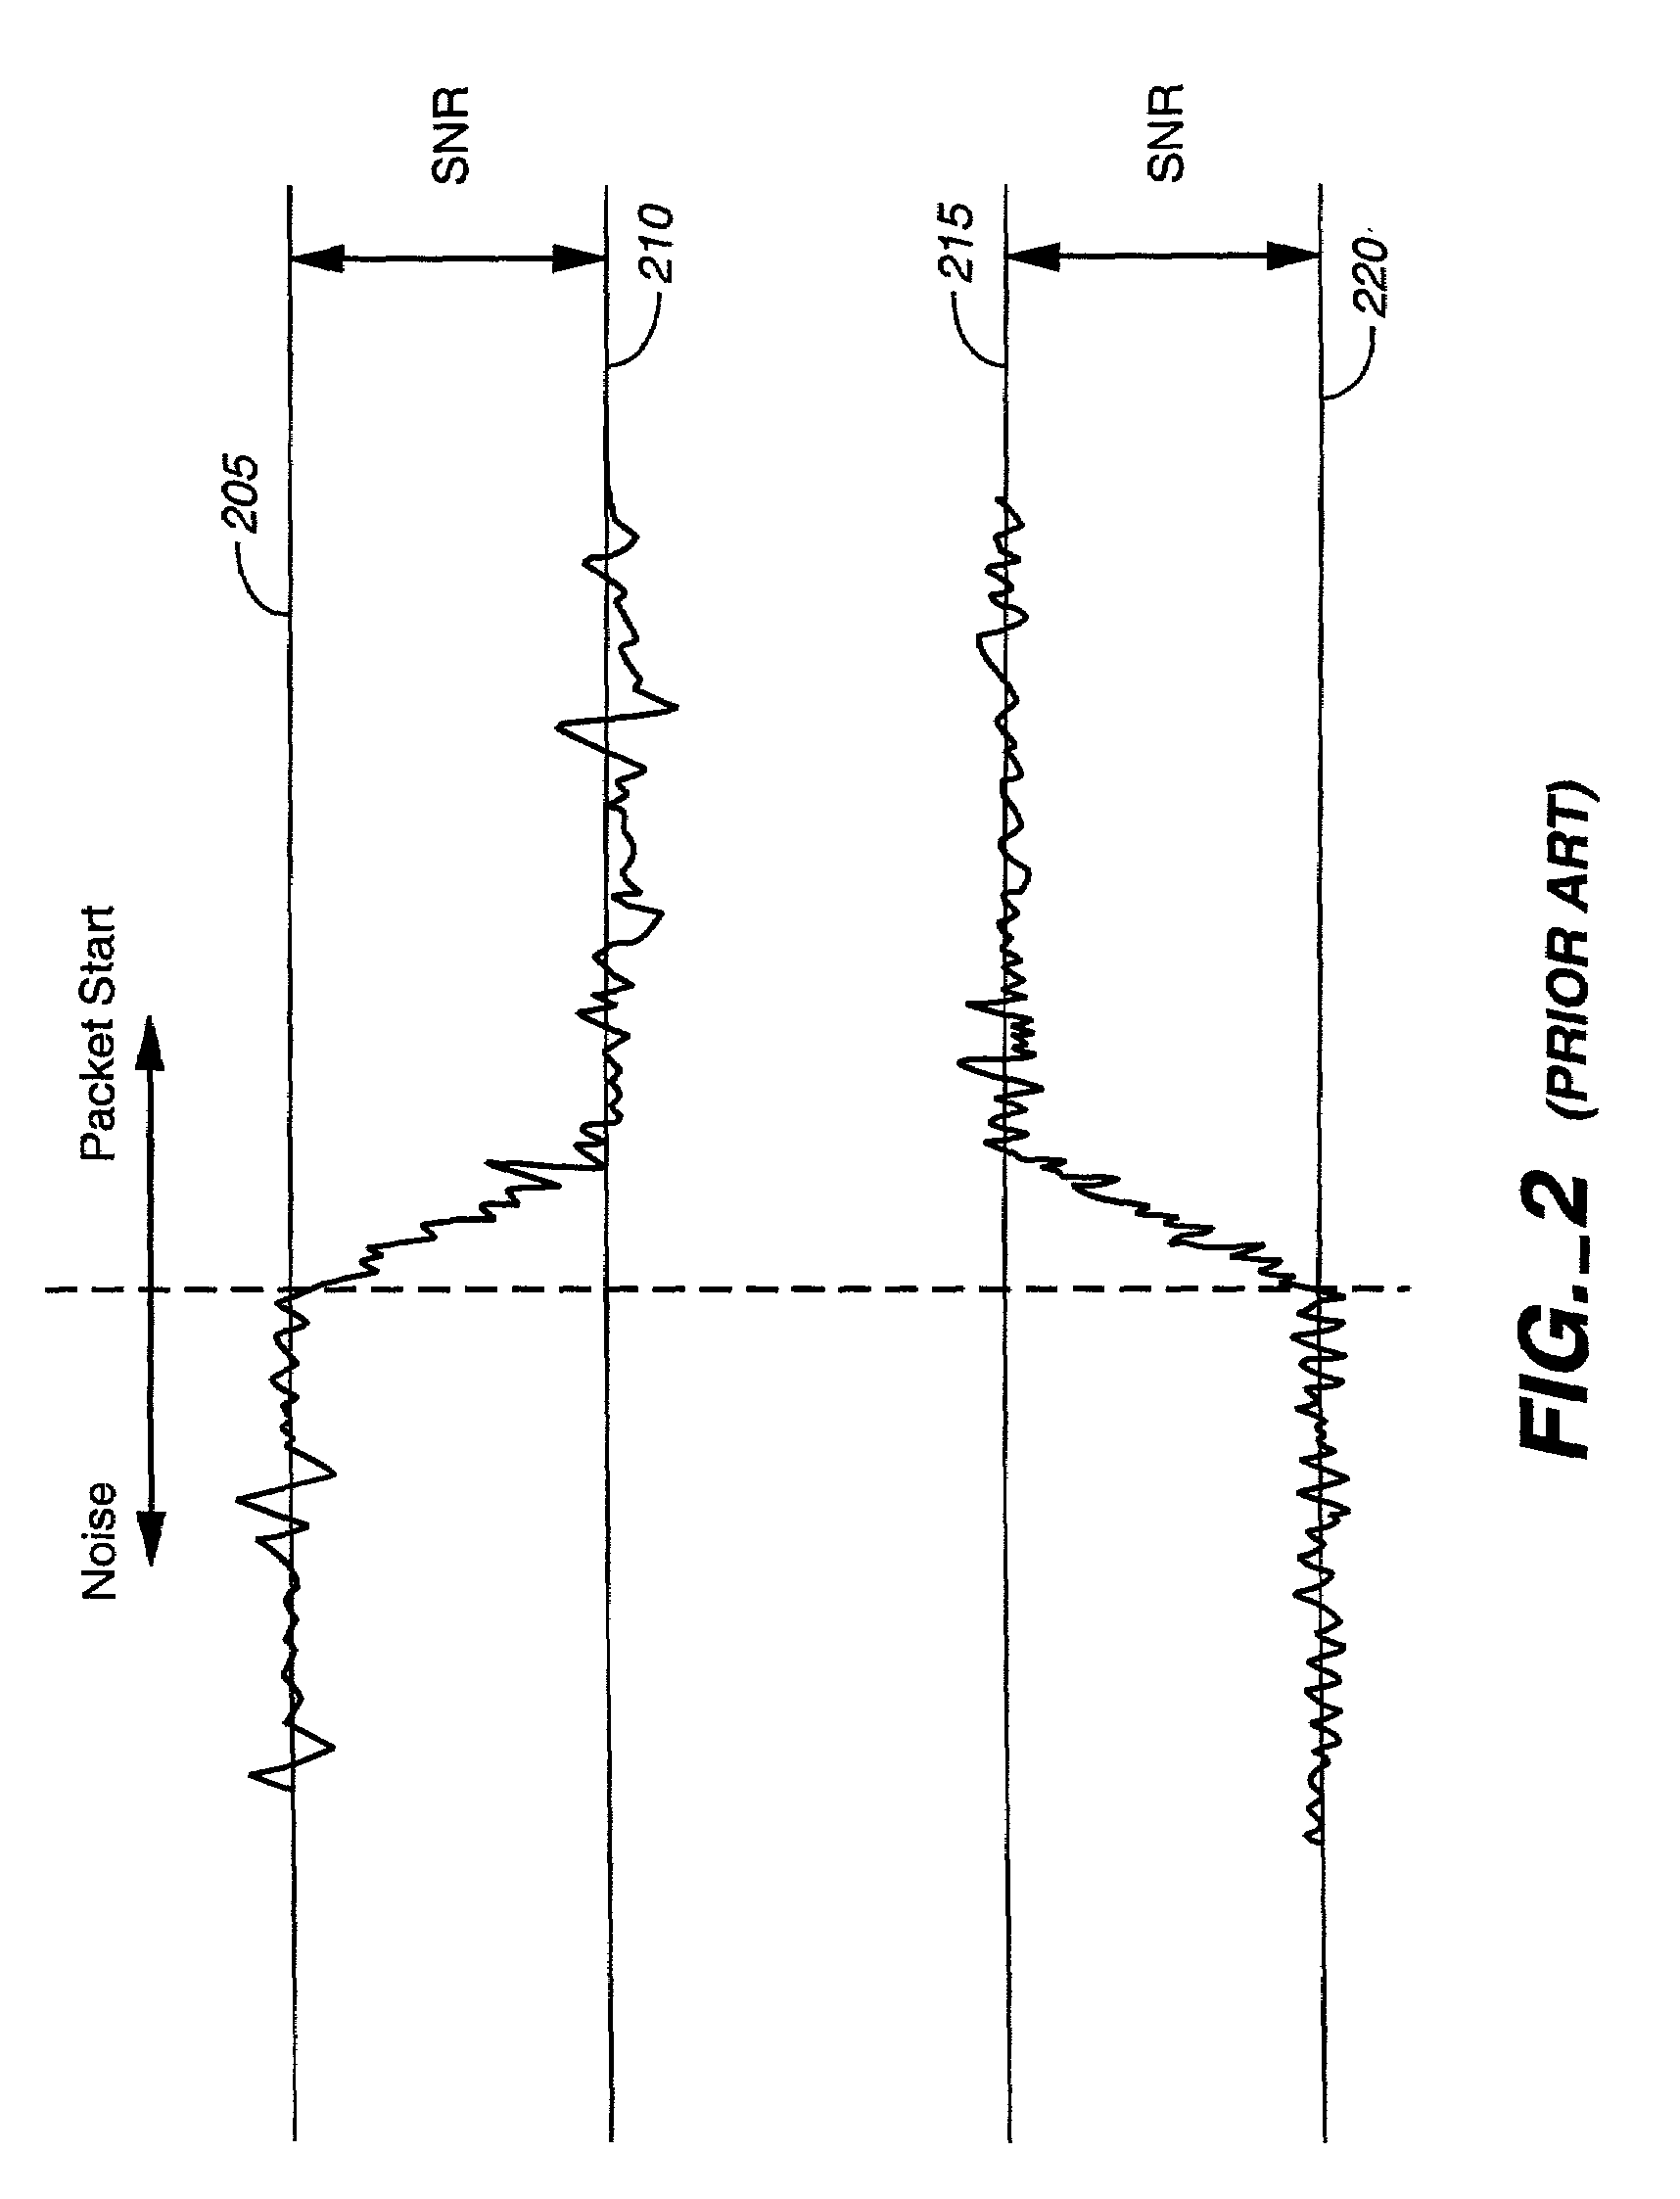 Apparatus for antenna diversity for wireless communication and method thereof